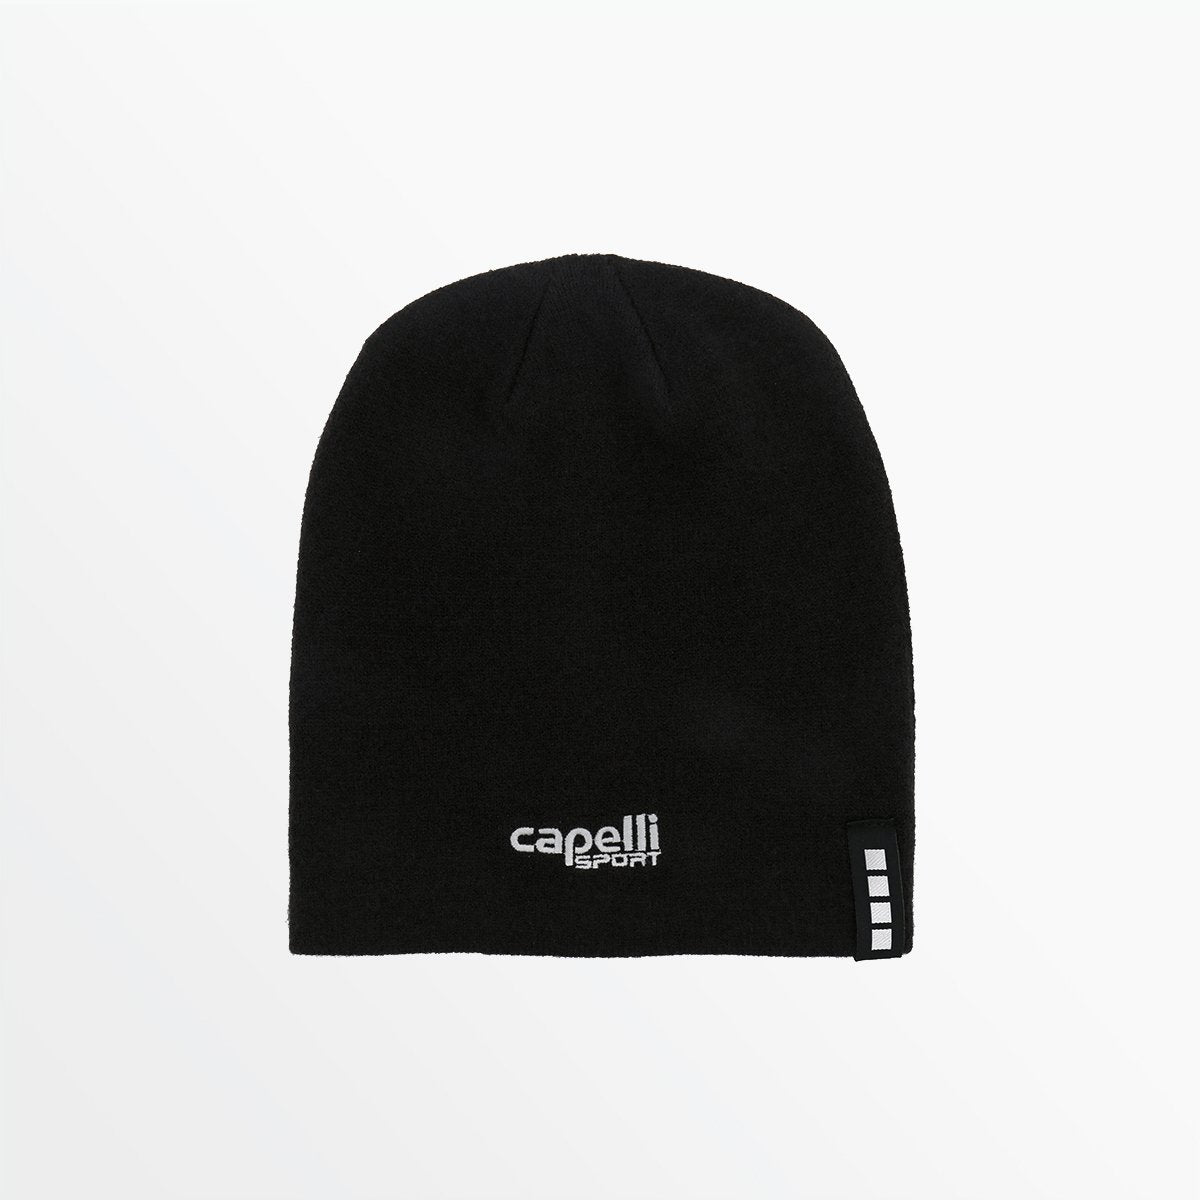 YOUTH BRANDED BEANIE